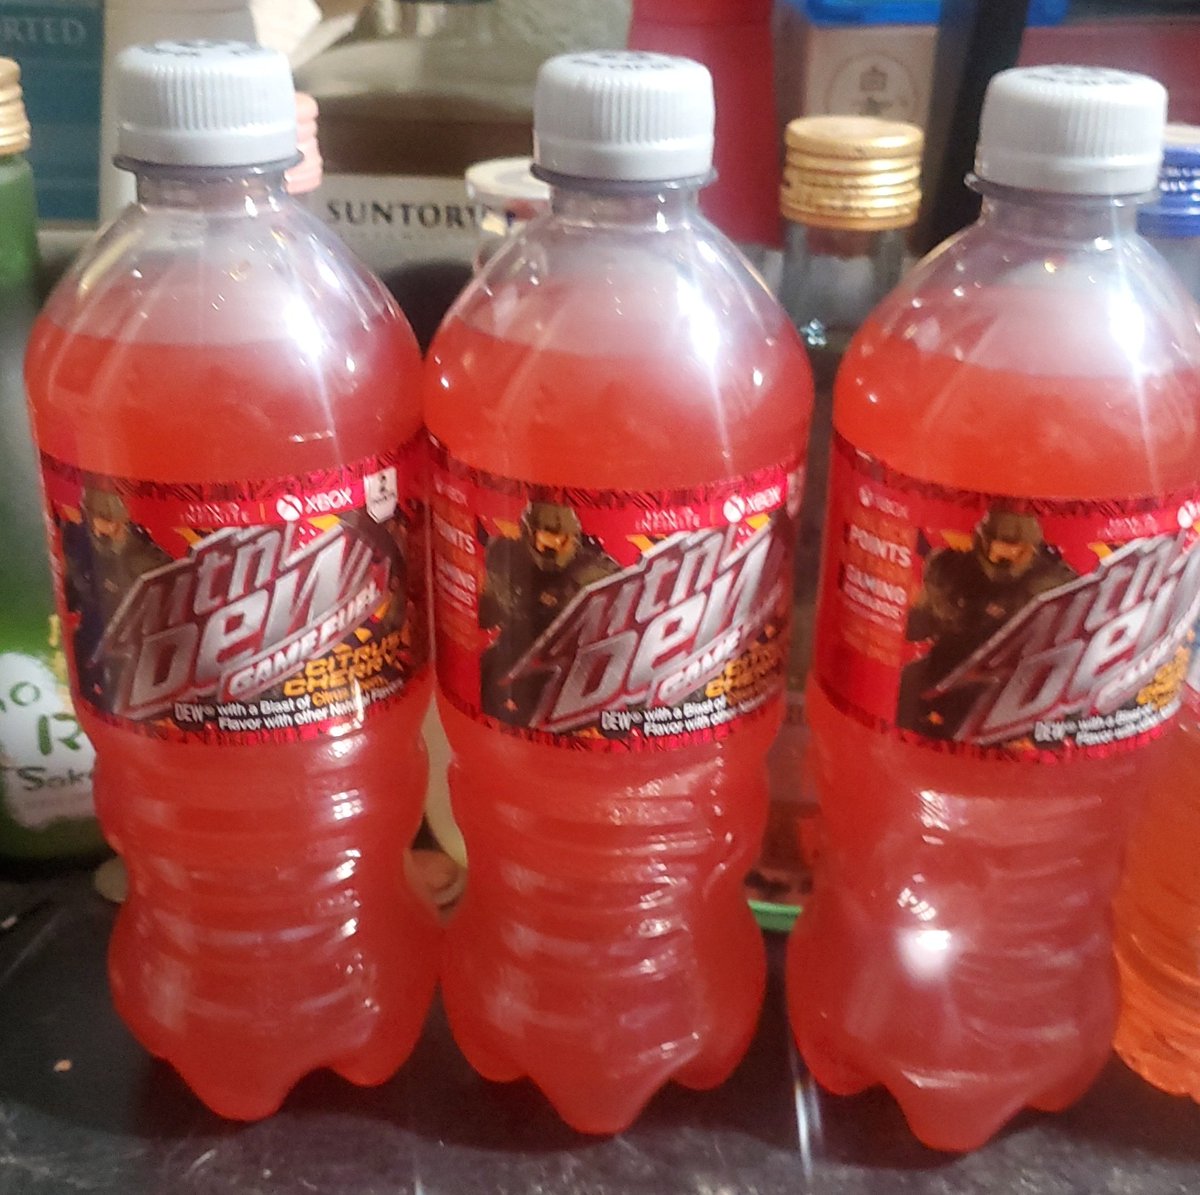 I've been searching almost all grocery stores near me for #MTNDewGameFuel and you're telling me all I had to do this entire time was go to a liquor store to get them?? Finally found these damn things 😤😤